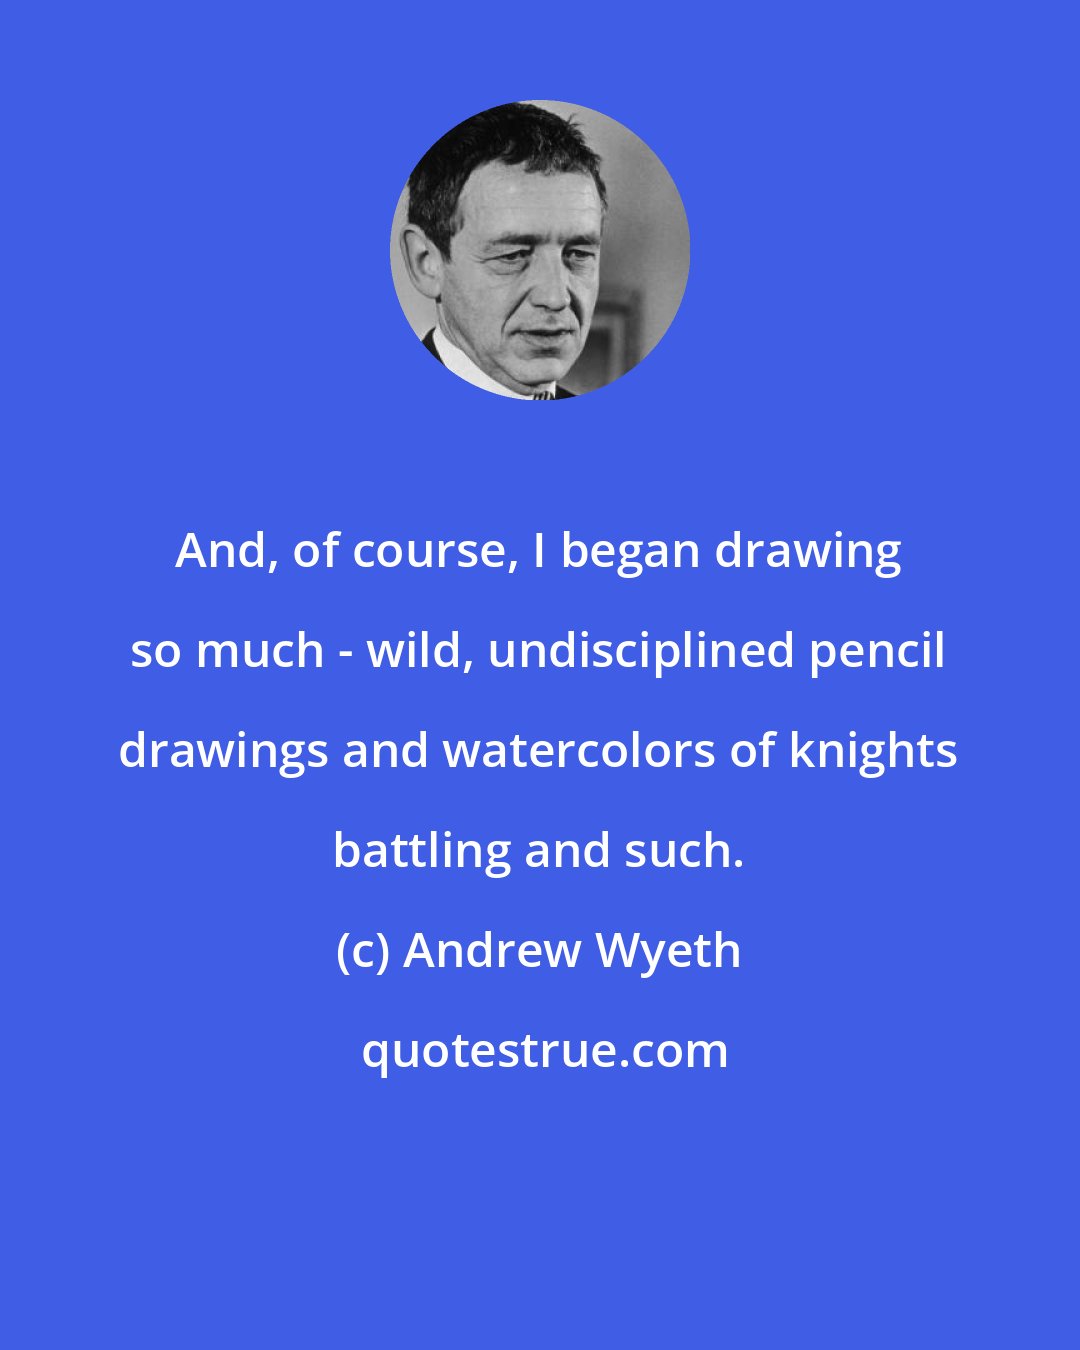 Andrew Wyeth: And, of course, I began drawing so much - wild, undisciplined pencil drawings and watercolors of knights battling and such.